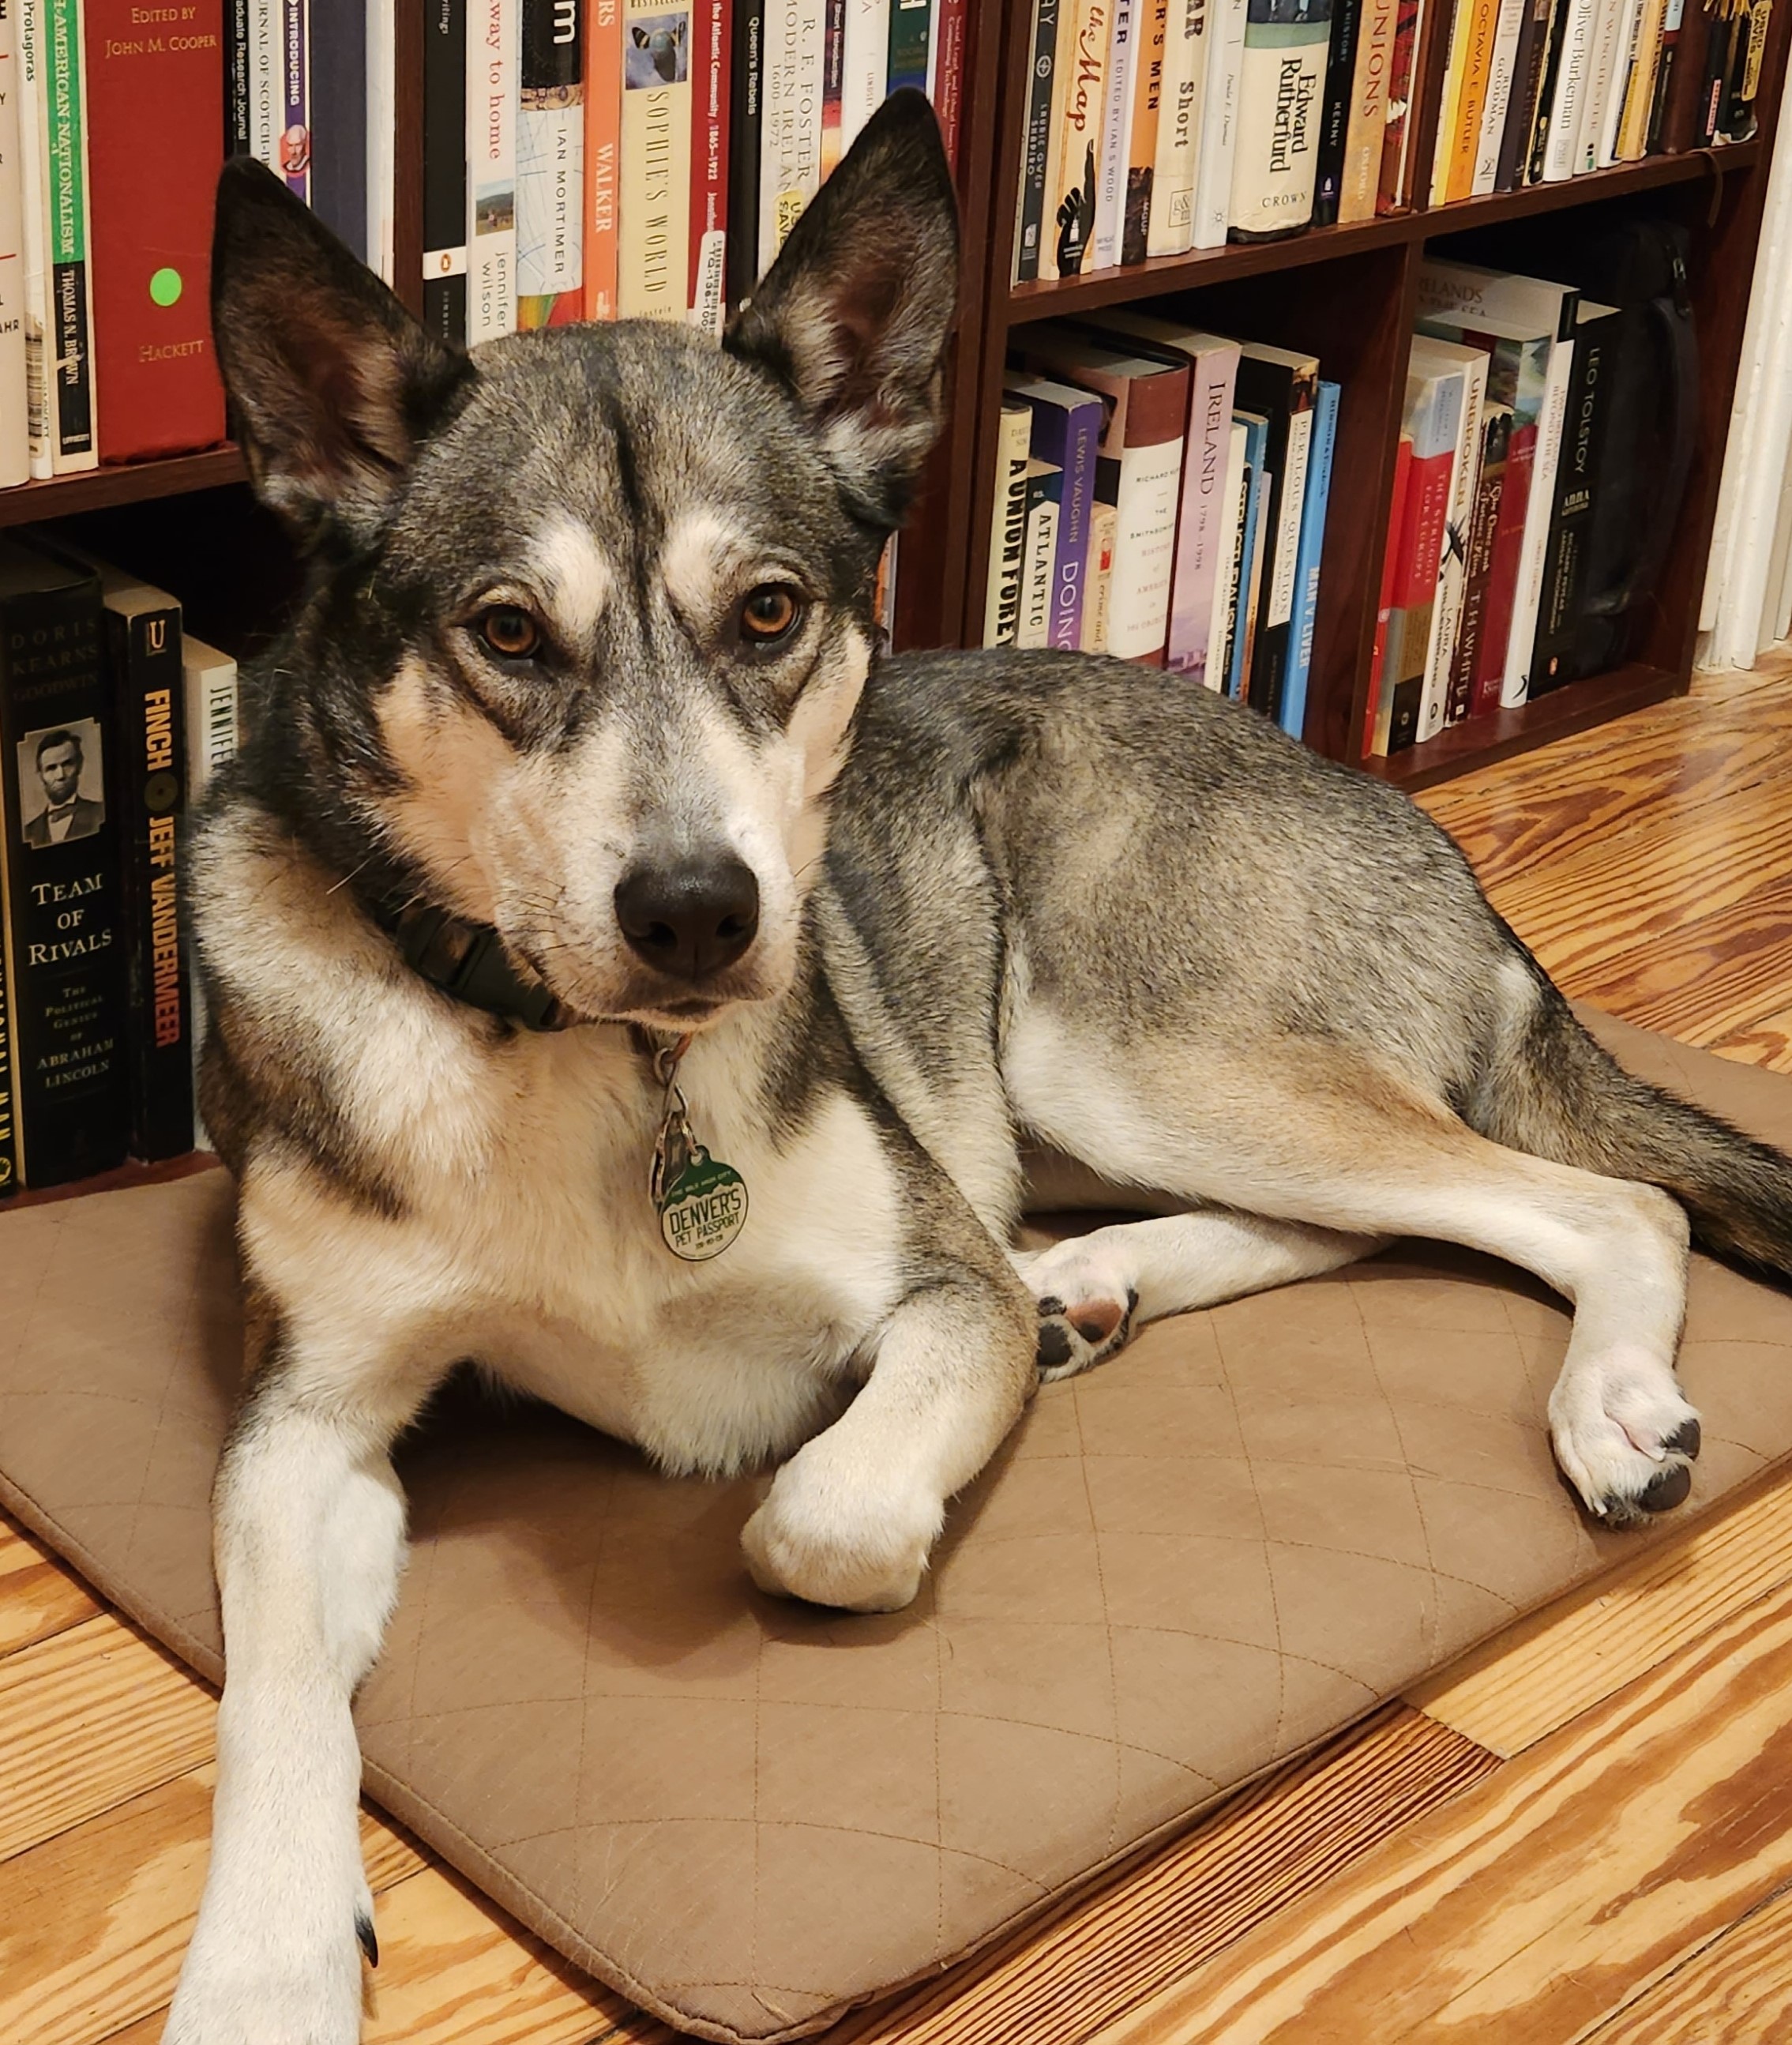 Photo of a dog with distinctive black and white husky-like markings. She is laying on a tan cushion in front of a bookcase full of history books, looking at the camera.